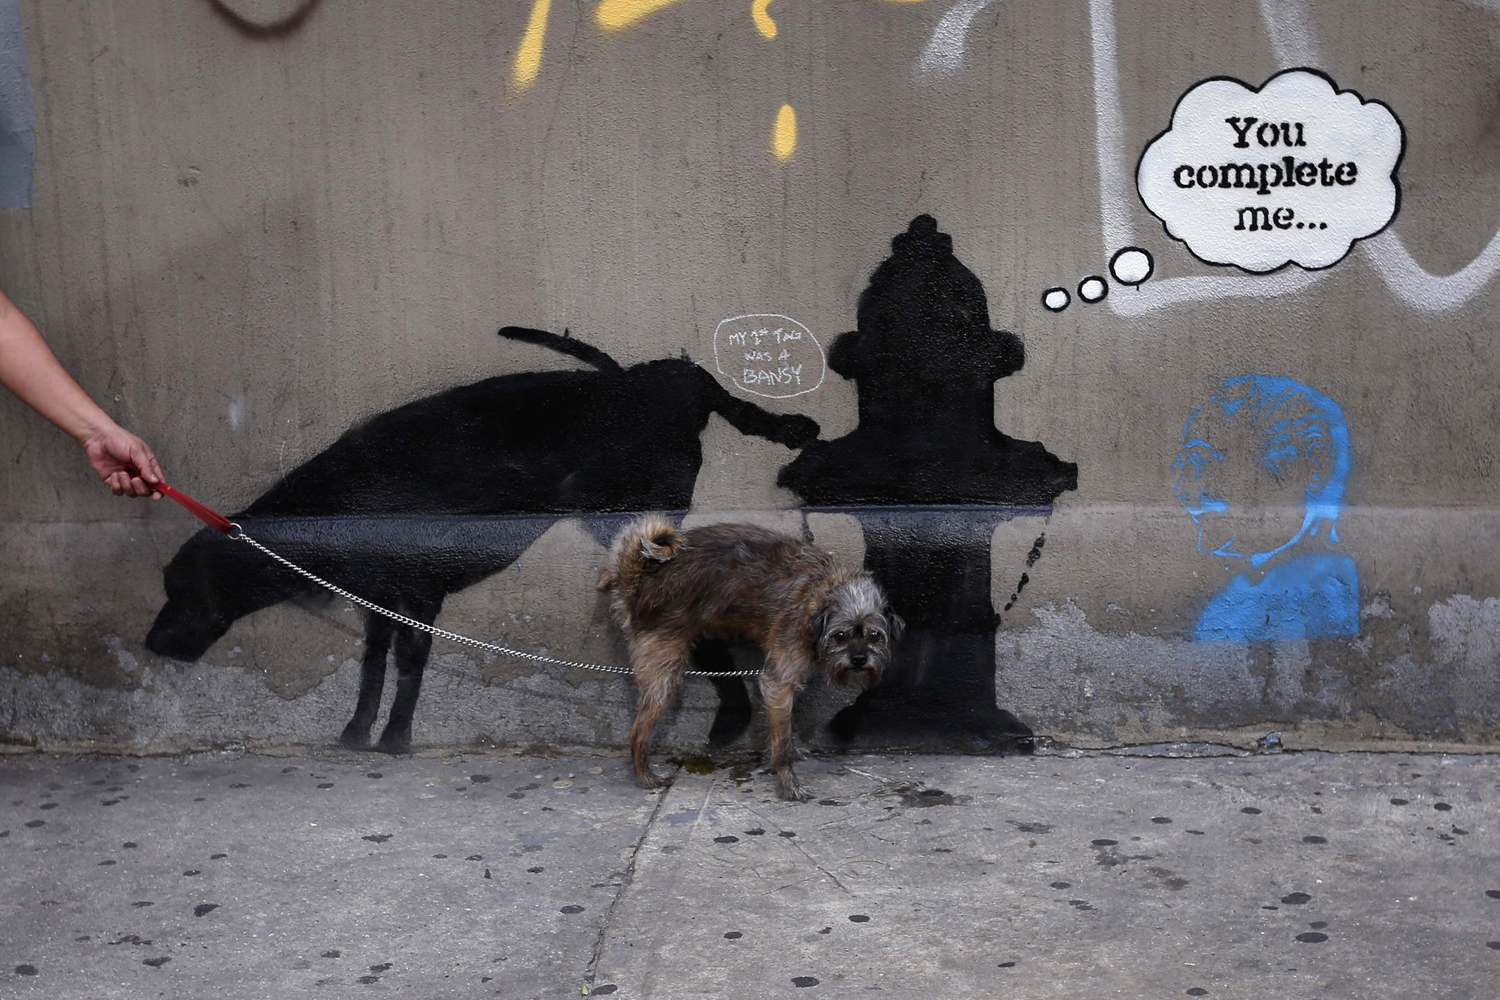 Oct. 3, 2013. A dog urinates on a new work by British street artist Banksy that appeared on West 24th street in New York after Banksy announced a month-long  artist's residency  in the city.